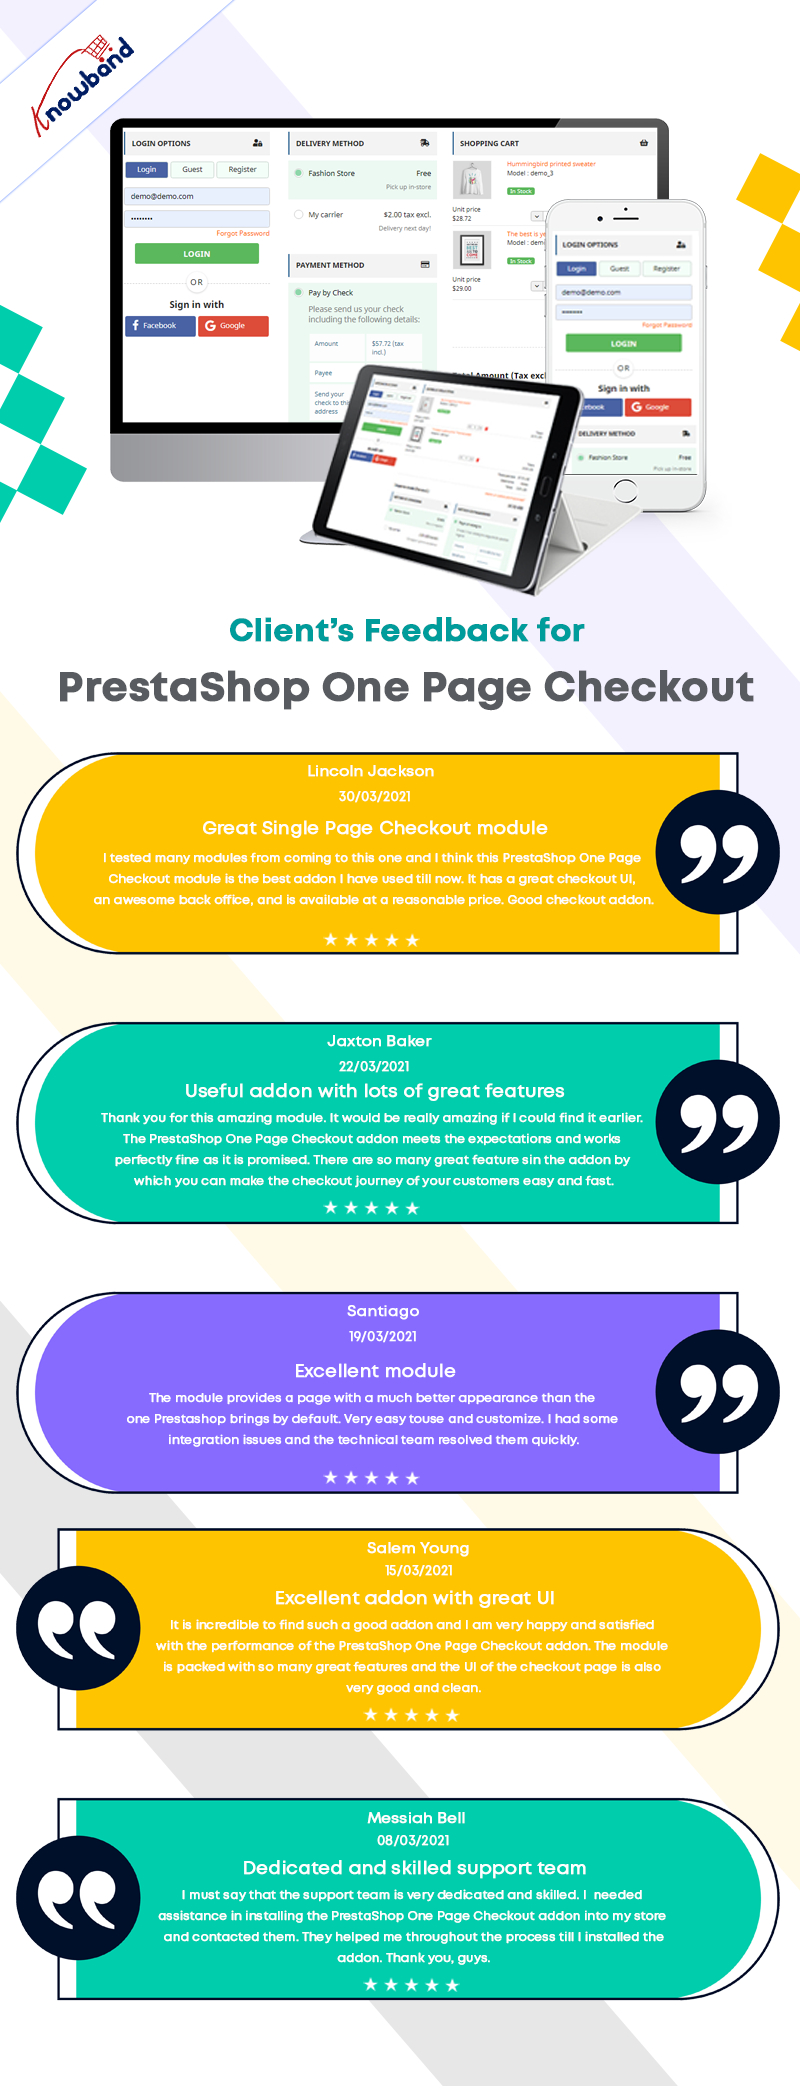 One page checkout by knowband reviews